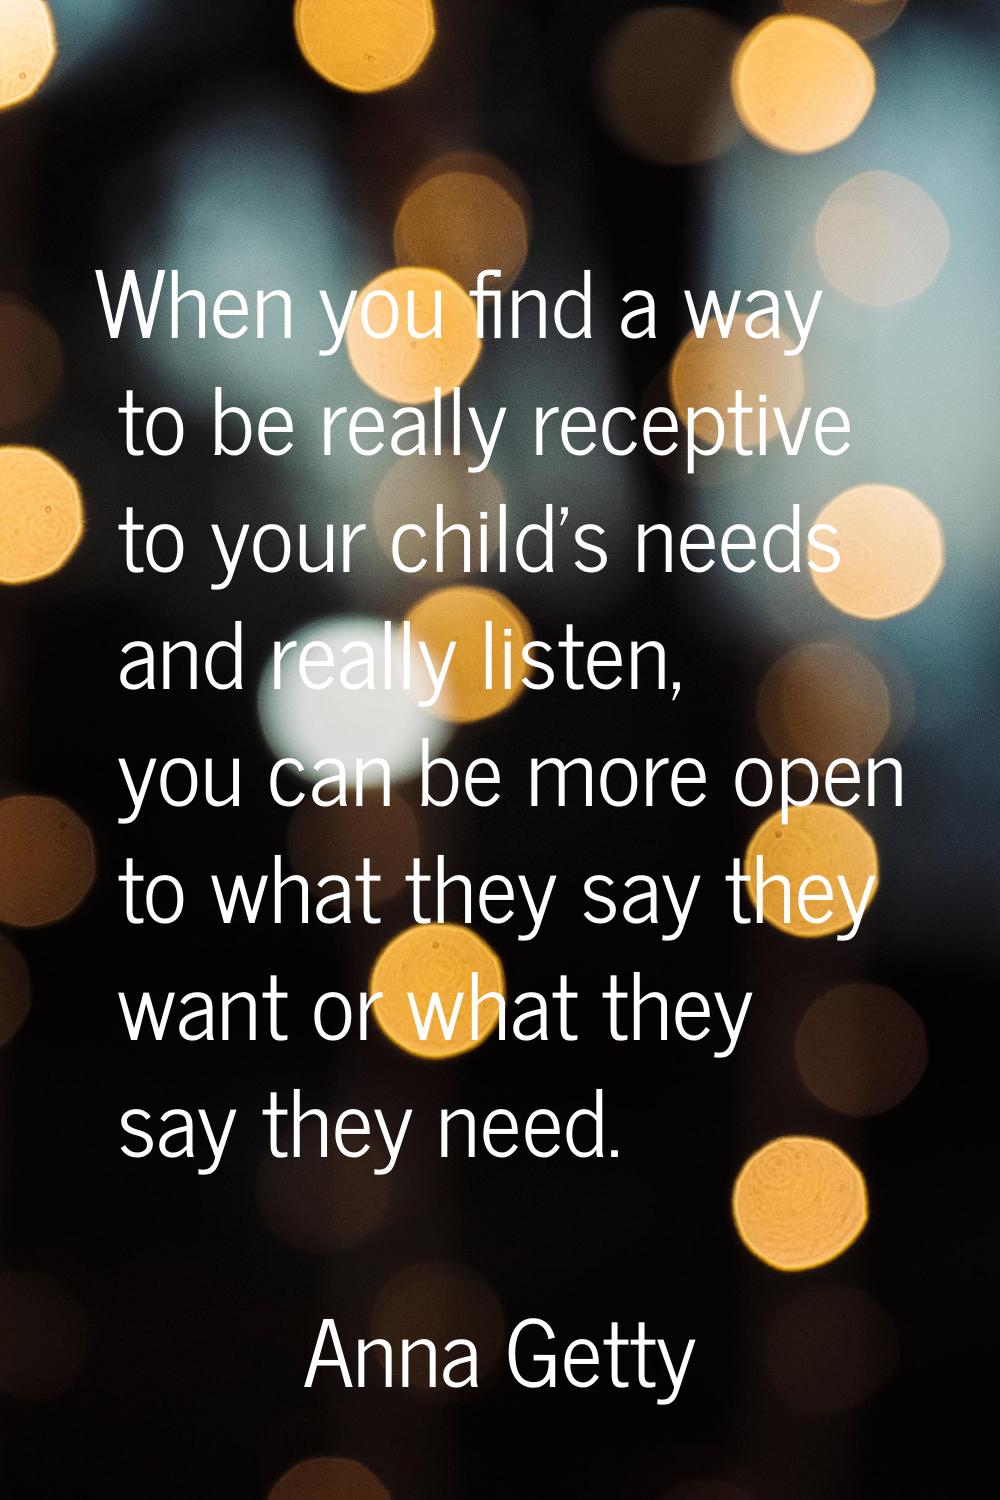 When you find a way to be really receptive to your child's needs and really listen, you can be more